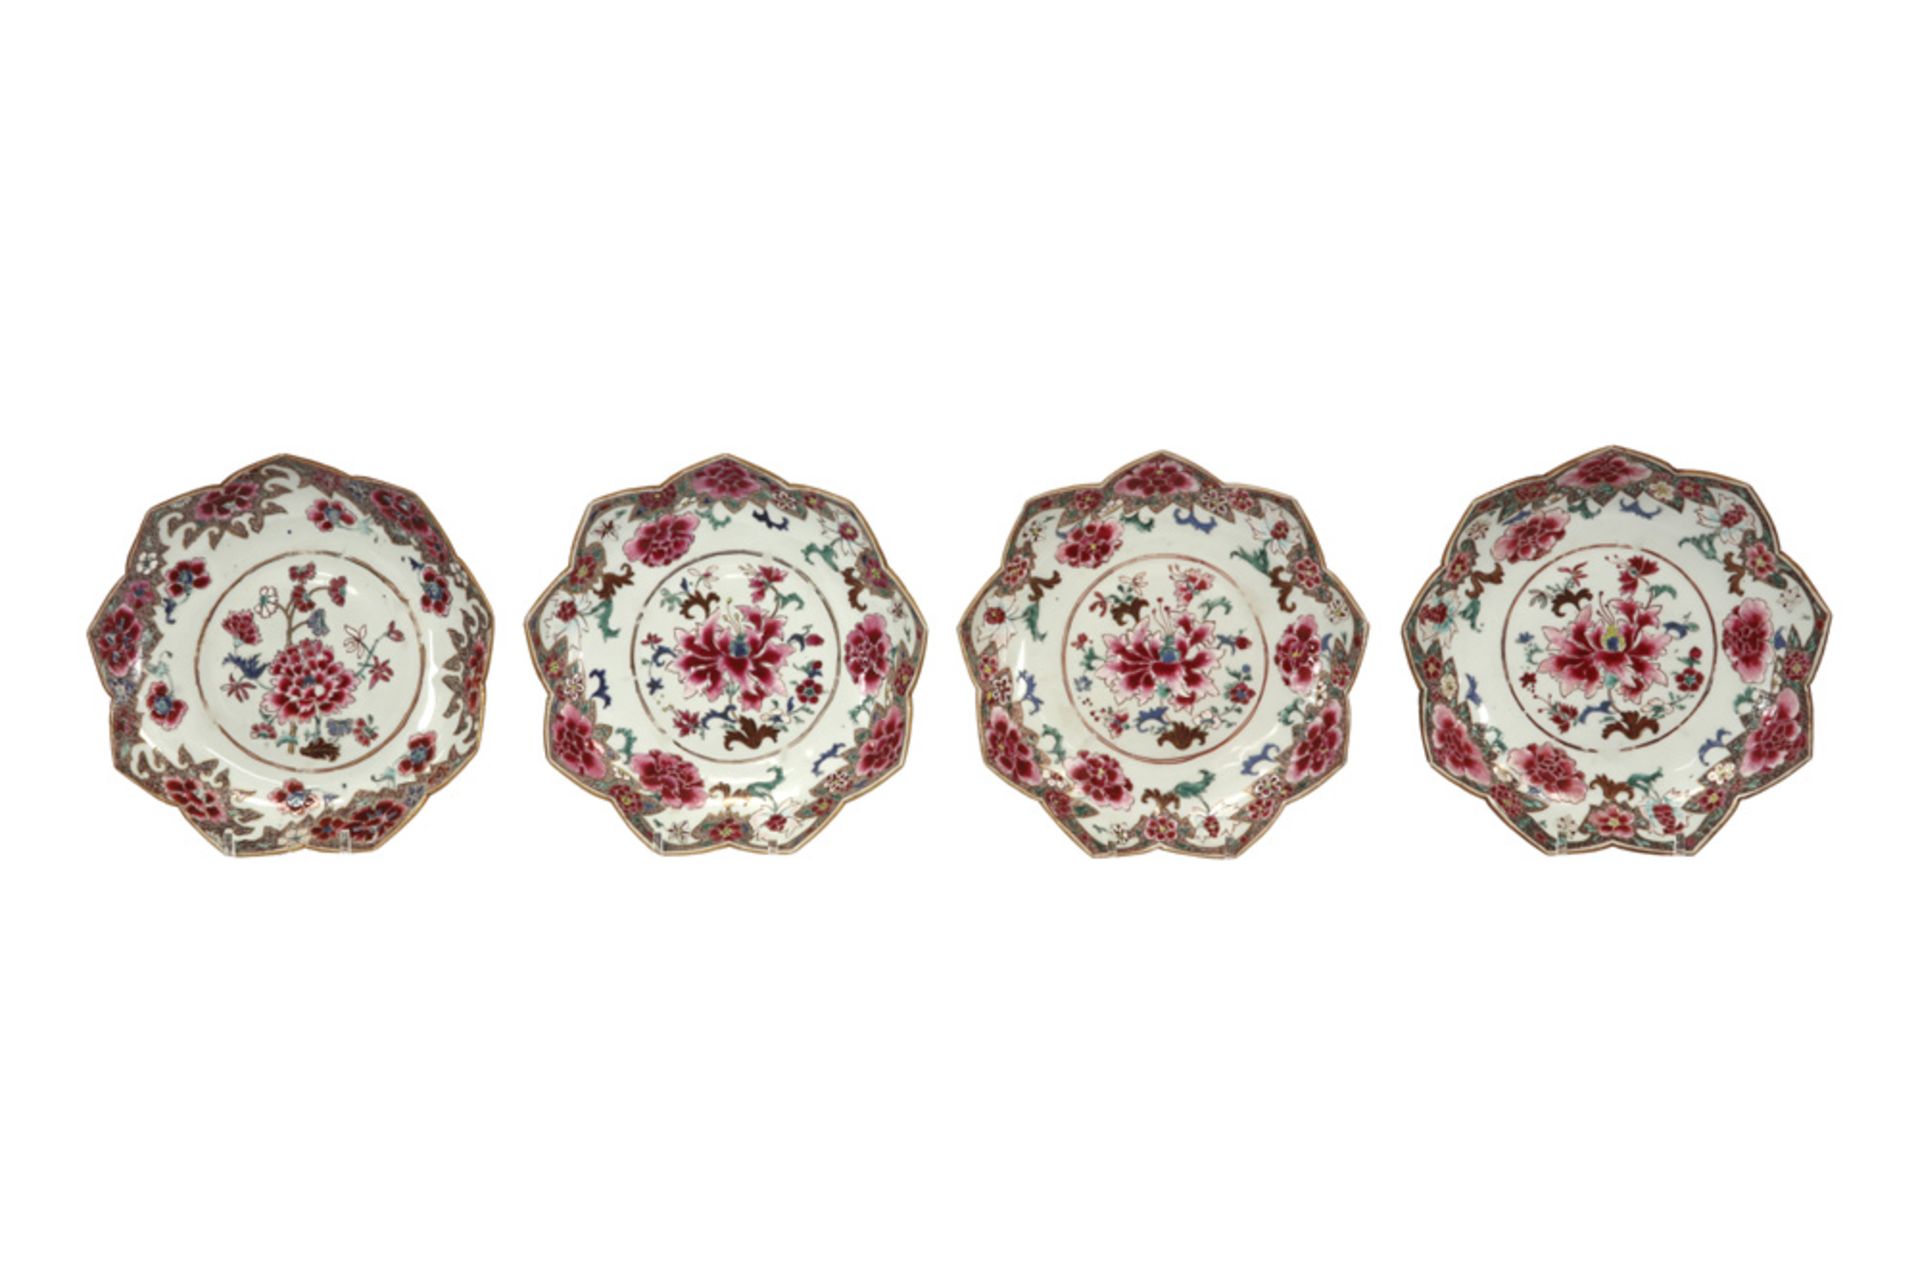 four 18th Cent. Chinese plates in porcelain with a 'Famille Rose' flower decor ||Serie van vier